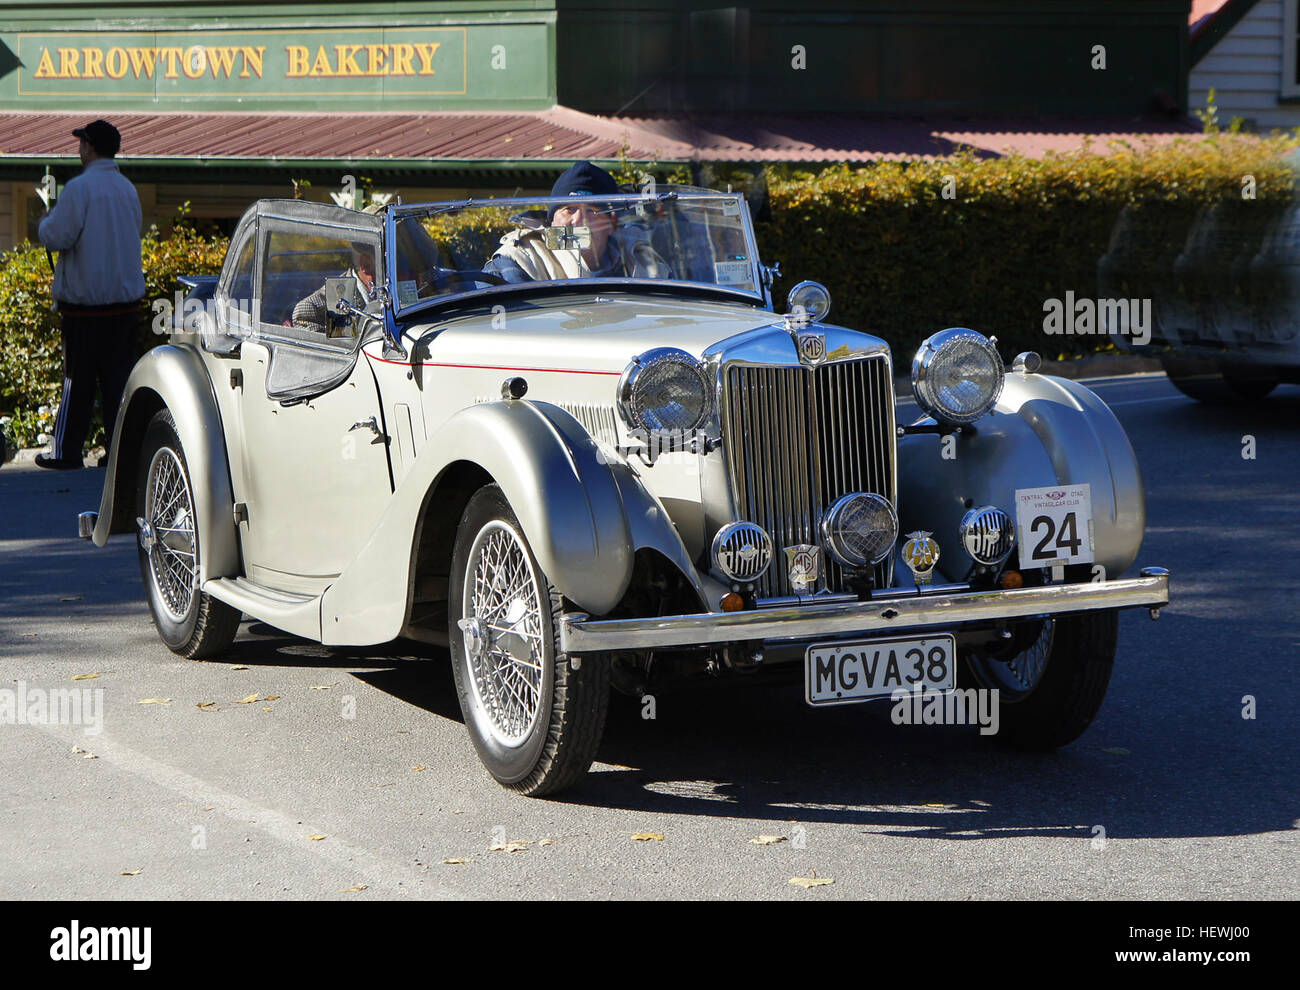 The MG VA, or MG 1.5 Litre as it was originally marketed, was produced by the MG Car company between February 1937 and September 1939 and was the smallest of the three sports saloons they produced in the late 1930s, the others being the SA and WA.  The car used a tuned version of the push-rod, overhead valve four-cylinder Morris TPBG type engine that was also fitted to the Wolseley 12/48 and Morris 12. The MG version had twin SU carburettors and developed 54 bhp (40 kW) at 4500 rpm. Drive was to the live rear axle via a four-speed manual gearbox with synchromesh on the top three ratios, though Stock Photo